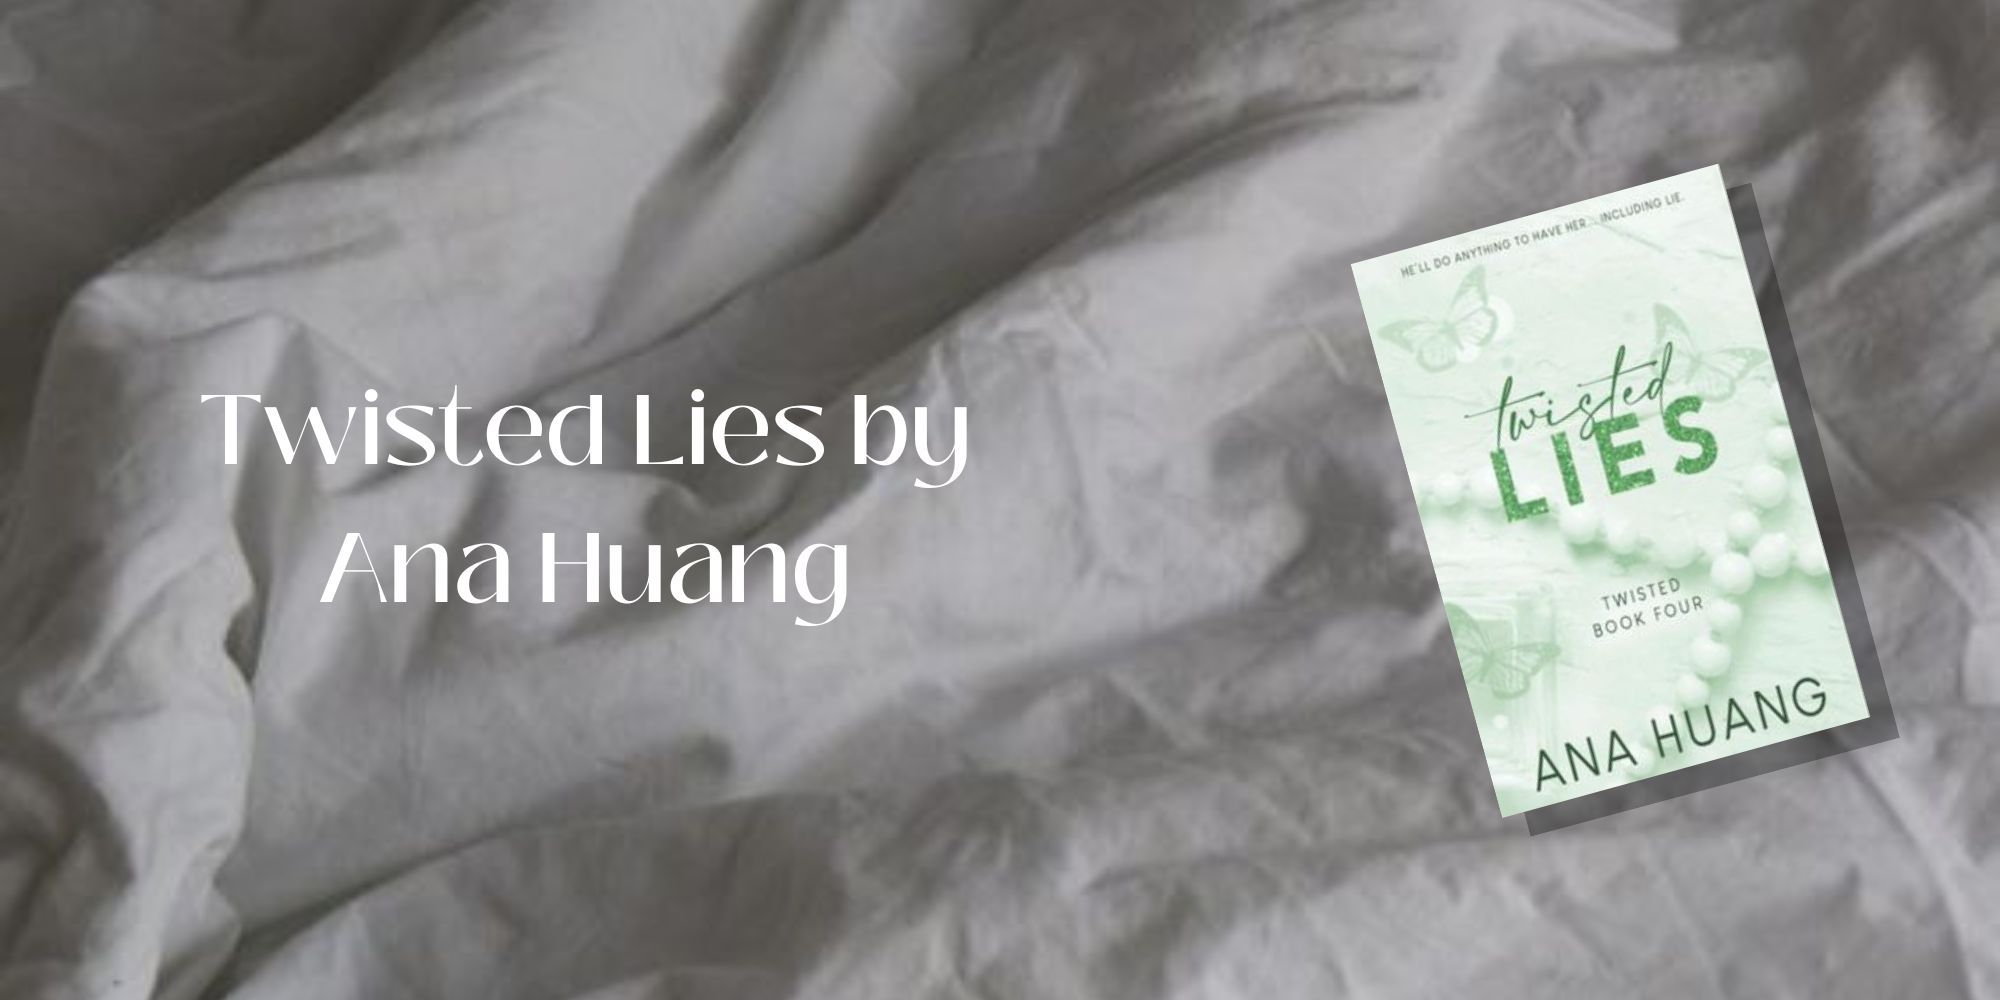 A paperback of Twisted Lies by Ana Huang